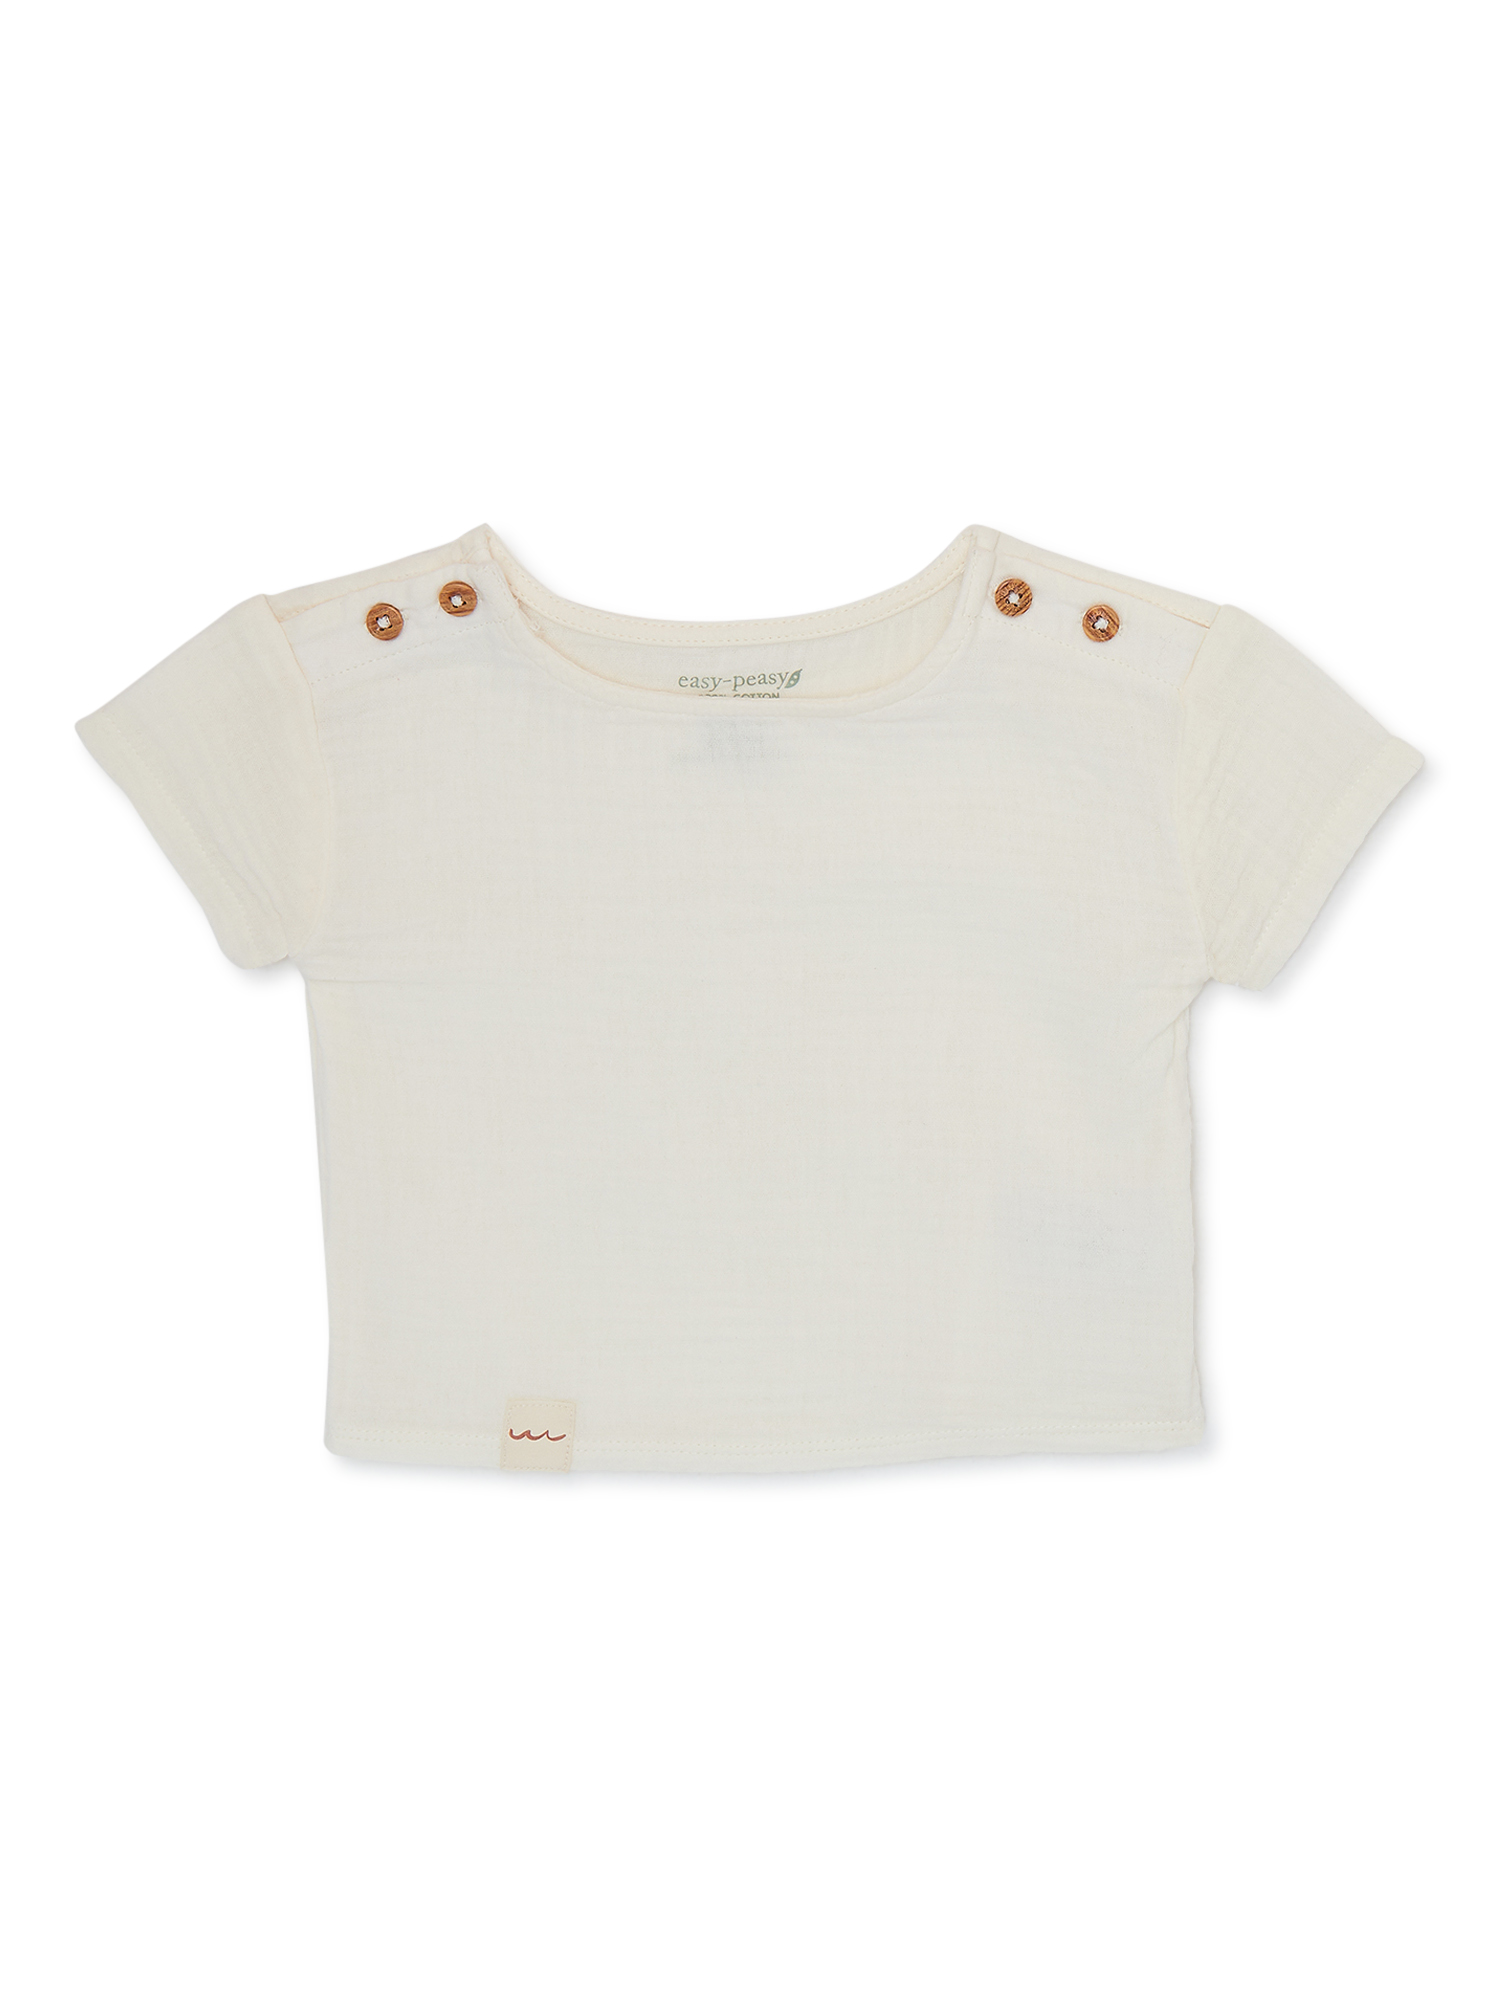 easy-peasy Baby Short Sleeve Solid Tee, Sizes 0M-24M - image 1 of 4